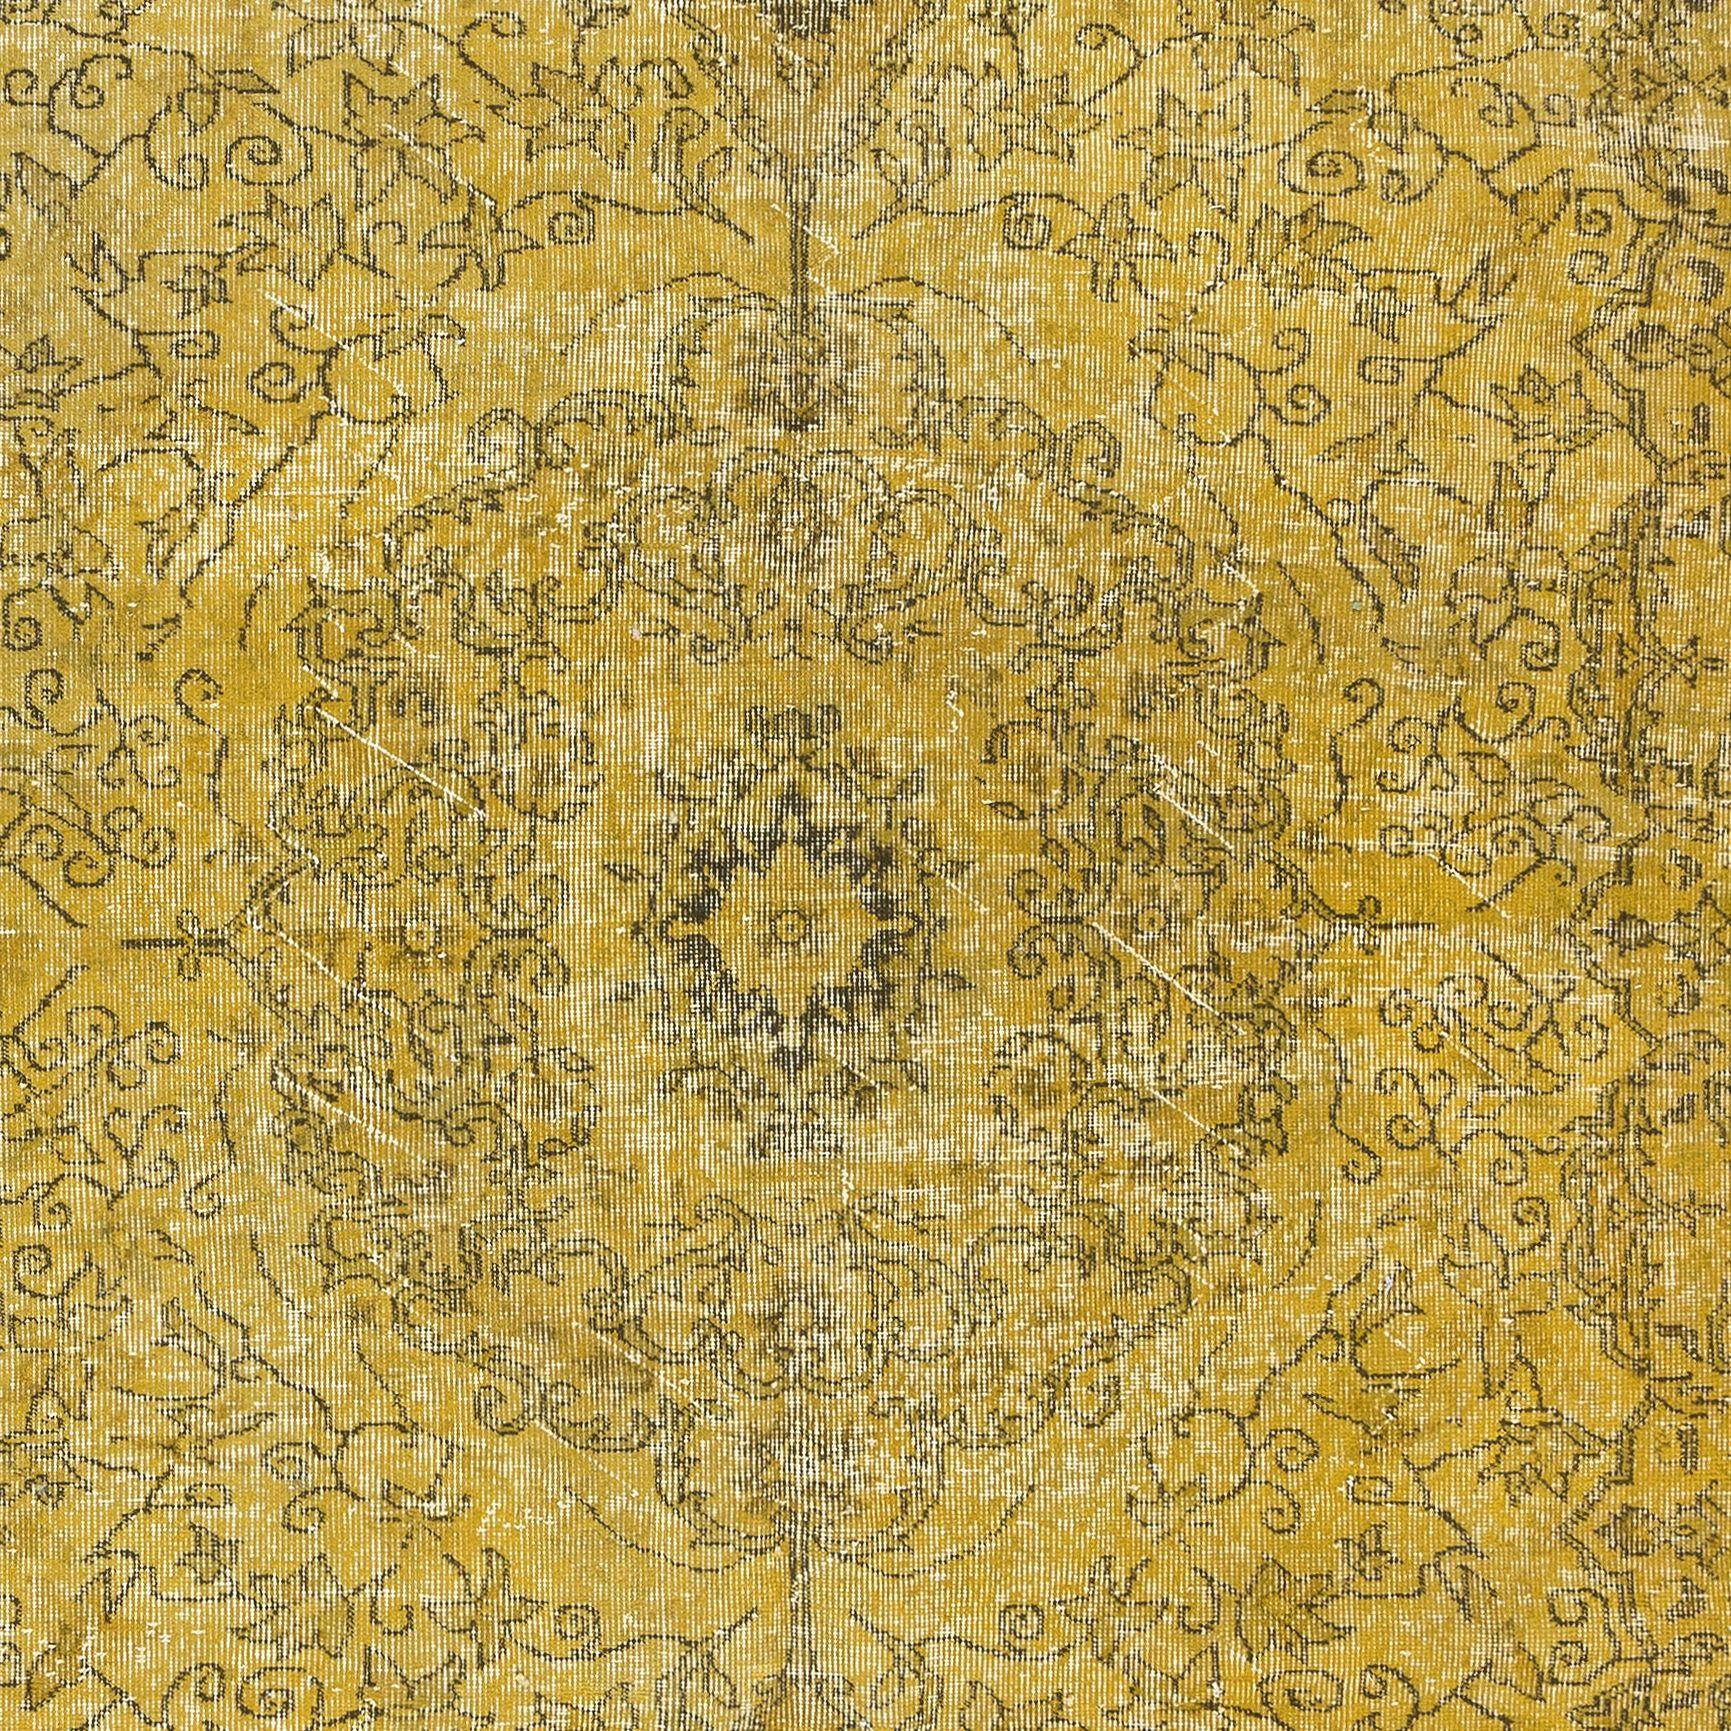 Modern 6.4x9.4 Ft Handmade Turkish Area Rug in Yellow, Ideal for Contemporary Interiors For Sale